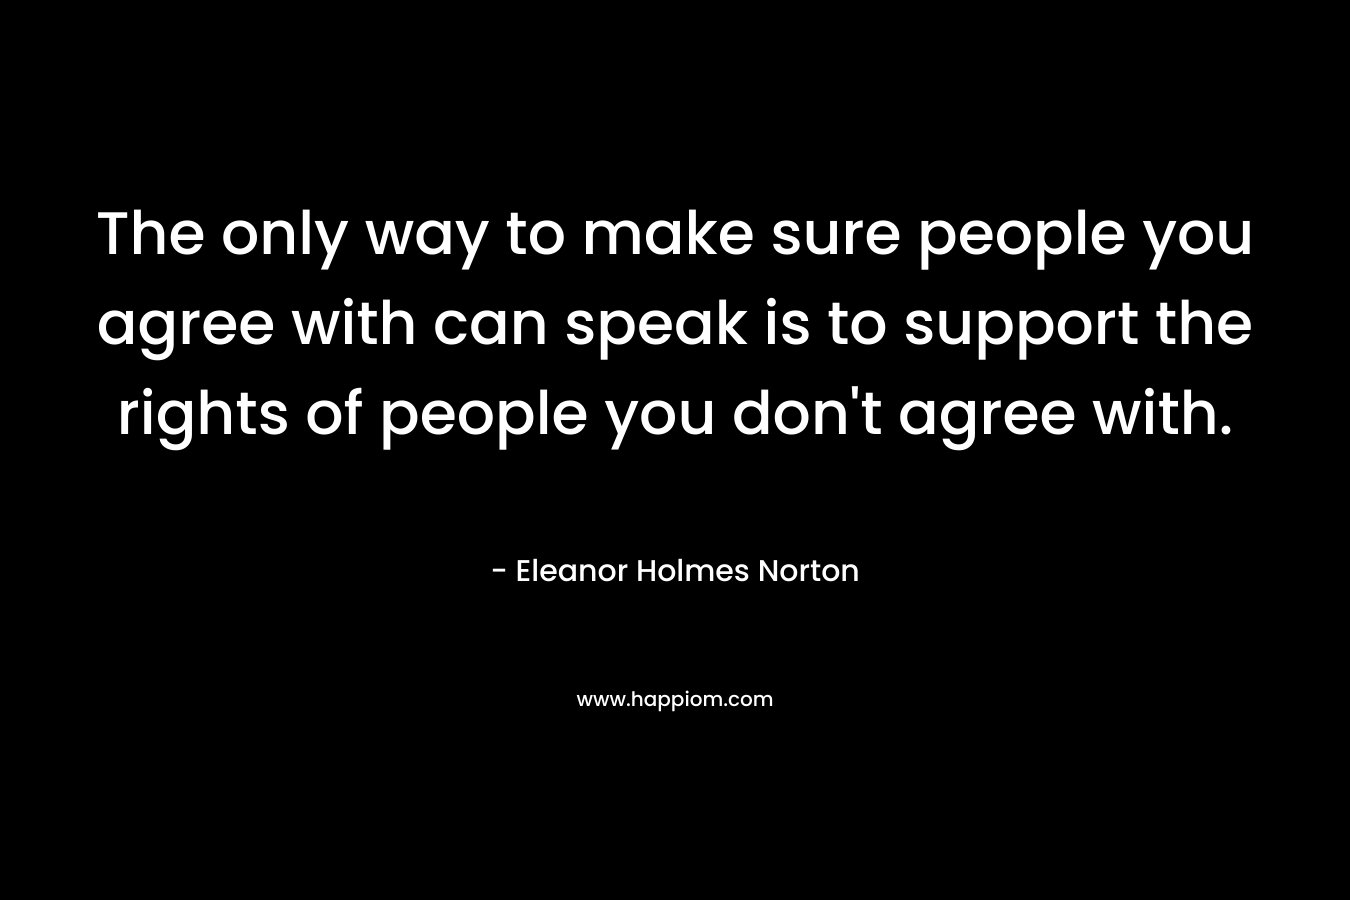 The only way to make sure people you agree with can speak is to support the rights of people you don't agree with. 